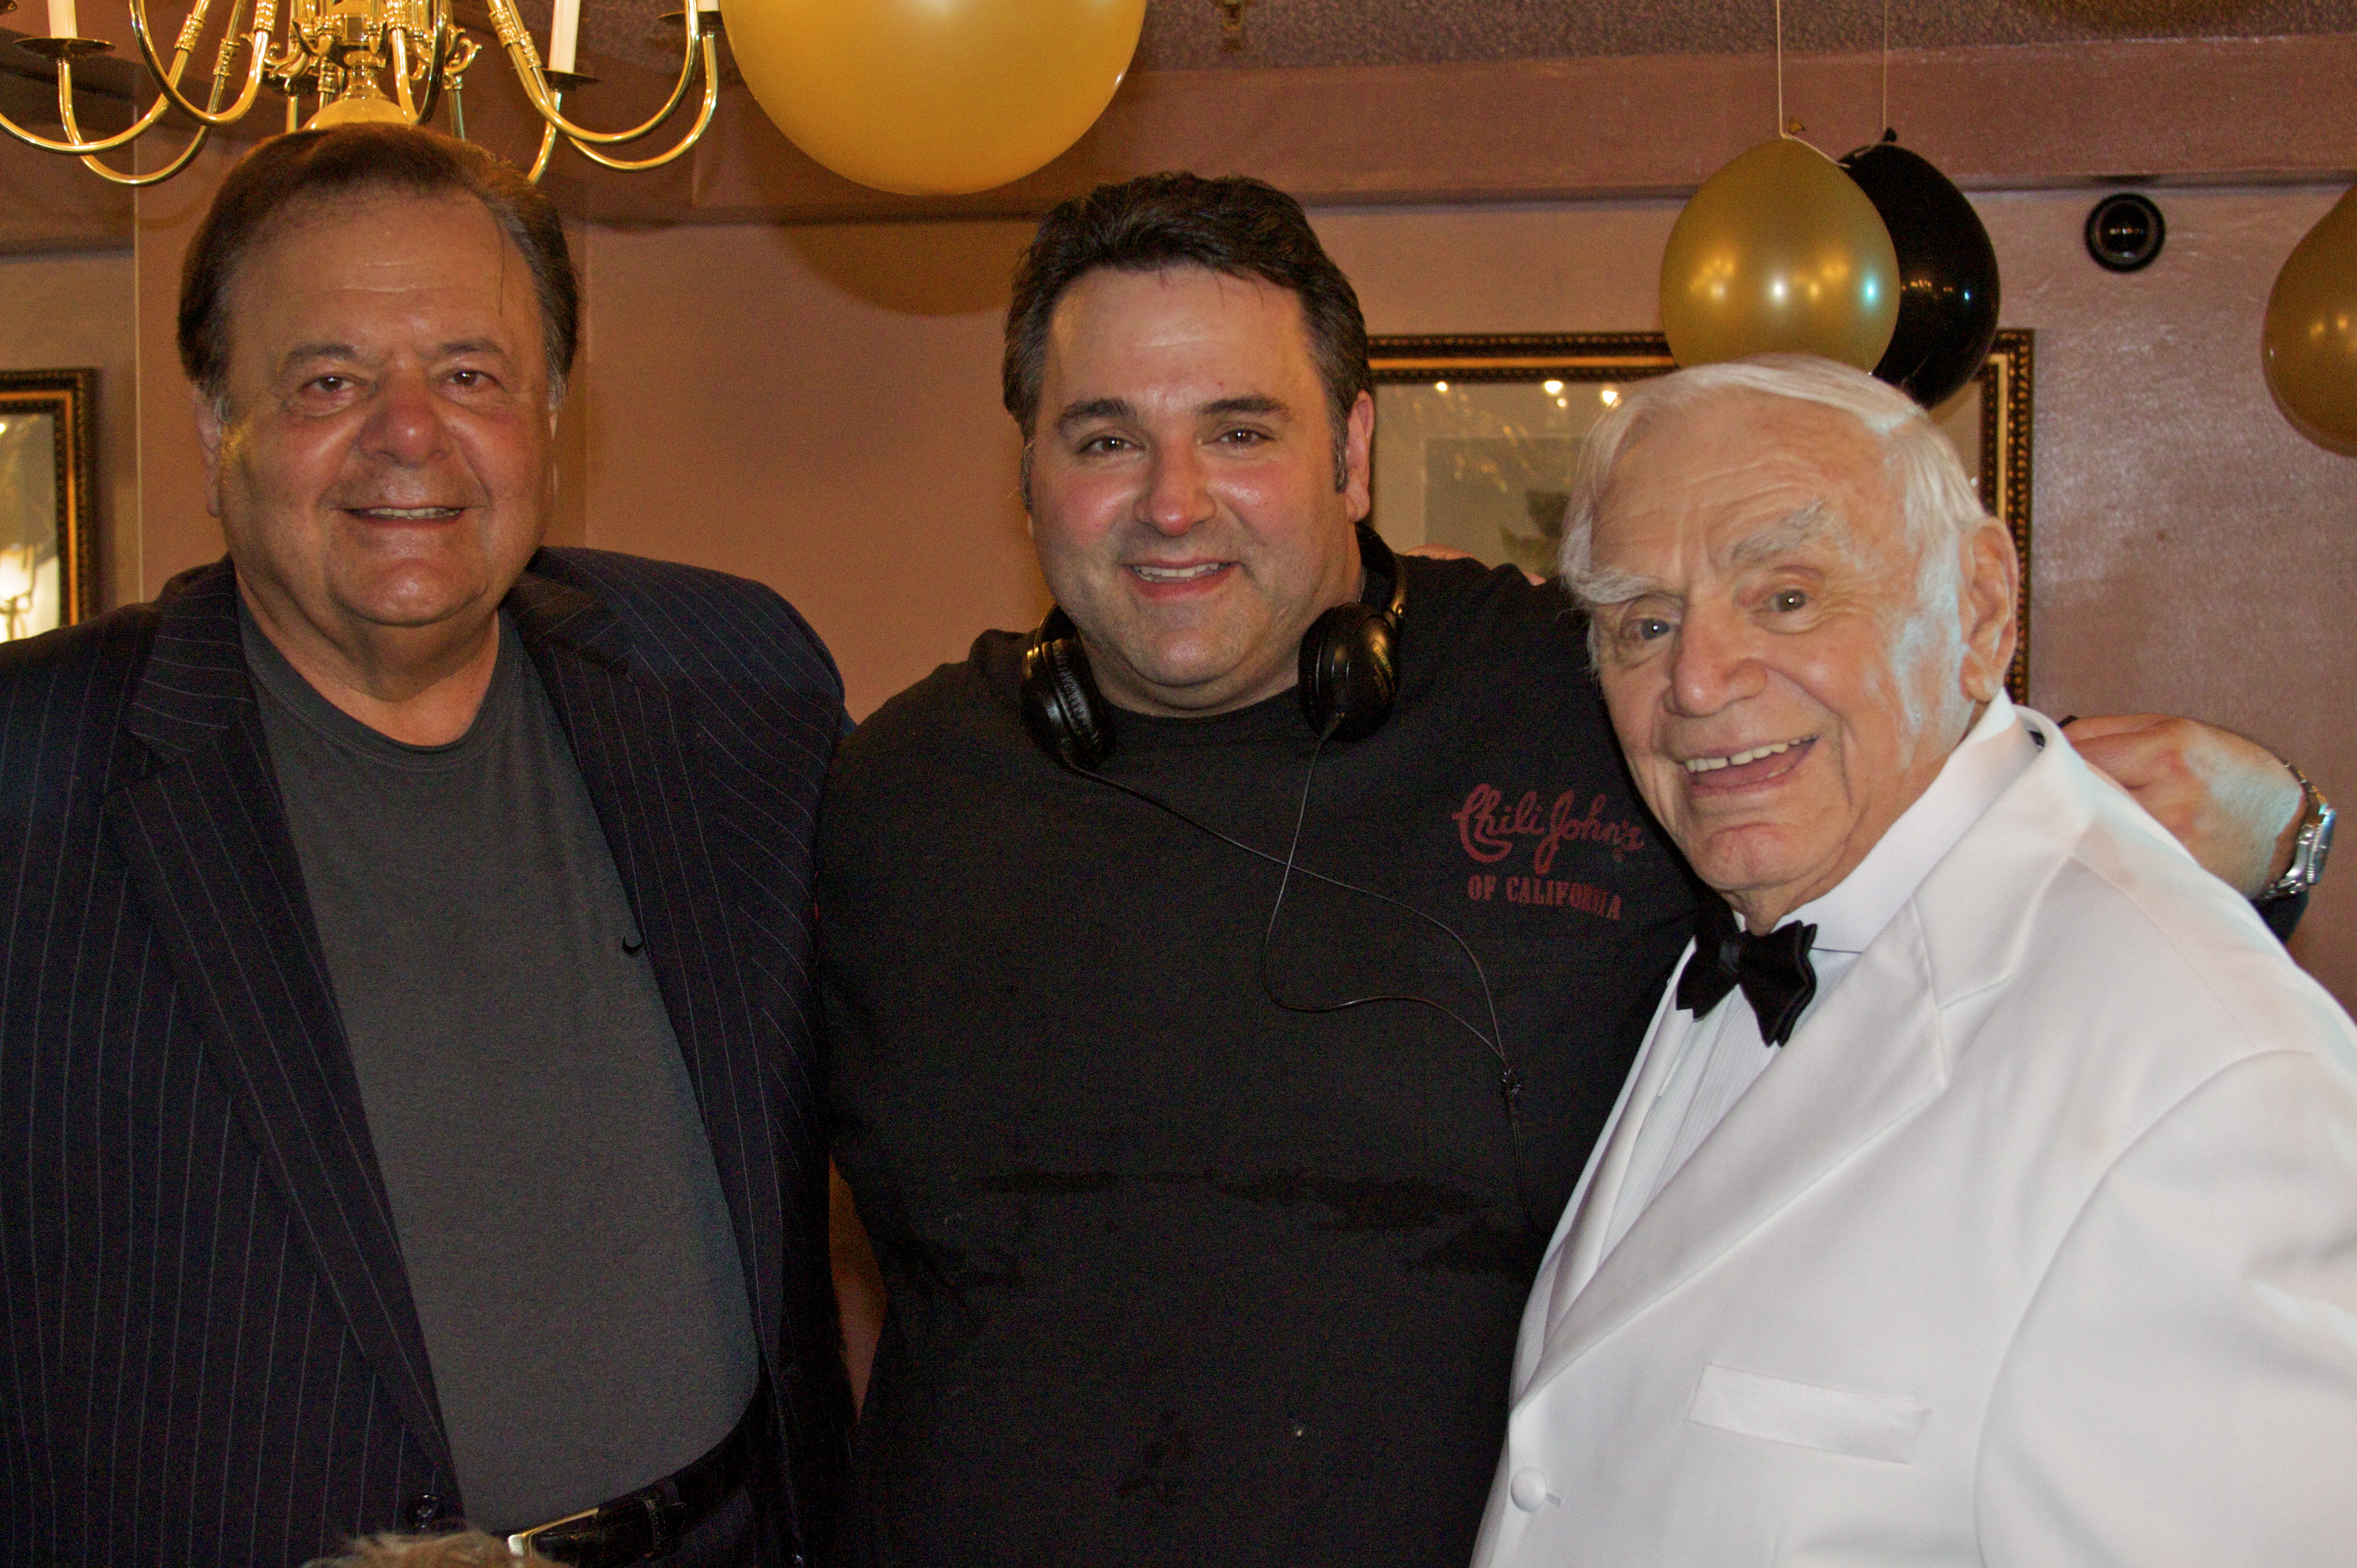 Director/Producer Sam Borowski (Center) is flanked by legendary actors Paul Sorvino (L) and Academy-Award Winner Ernest Borgnine (R) on the set of NIGHT CLUB.